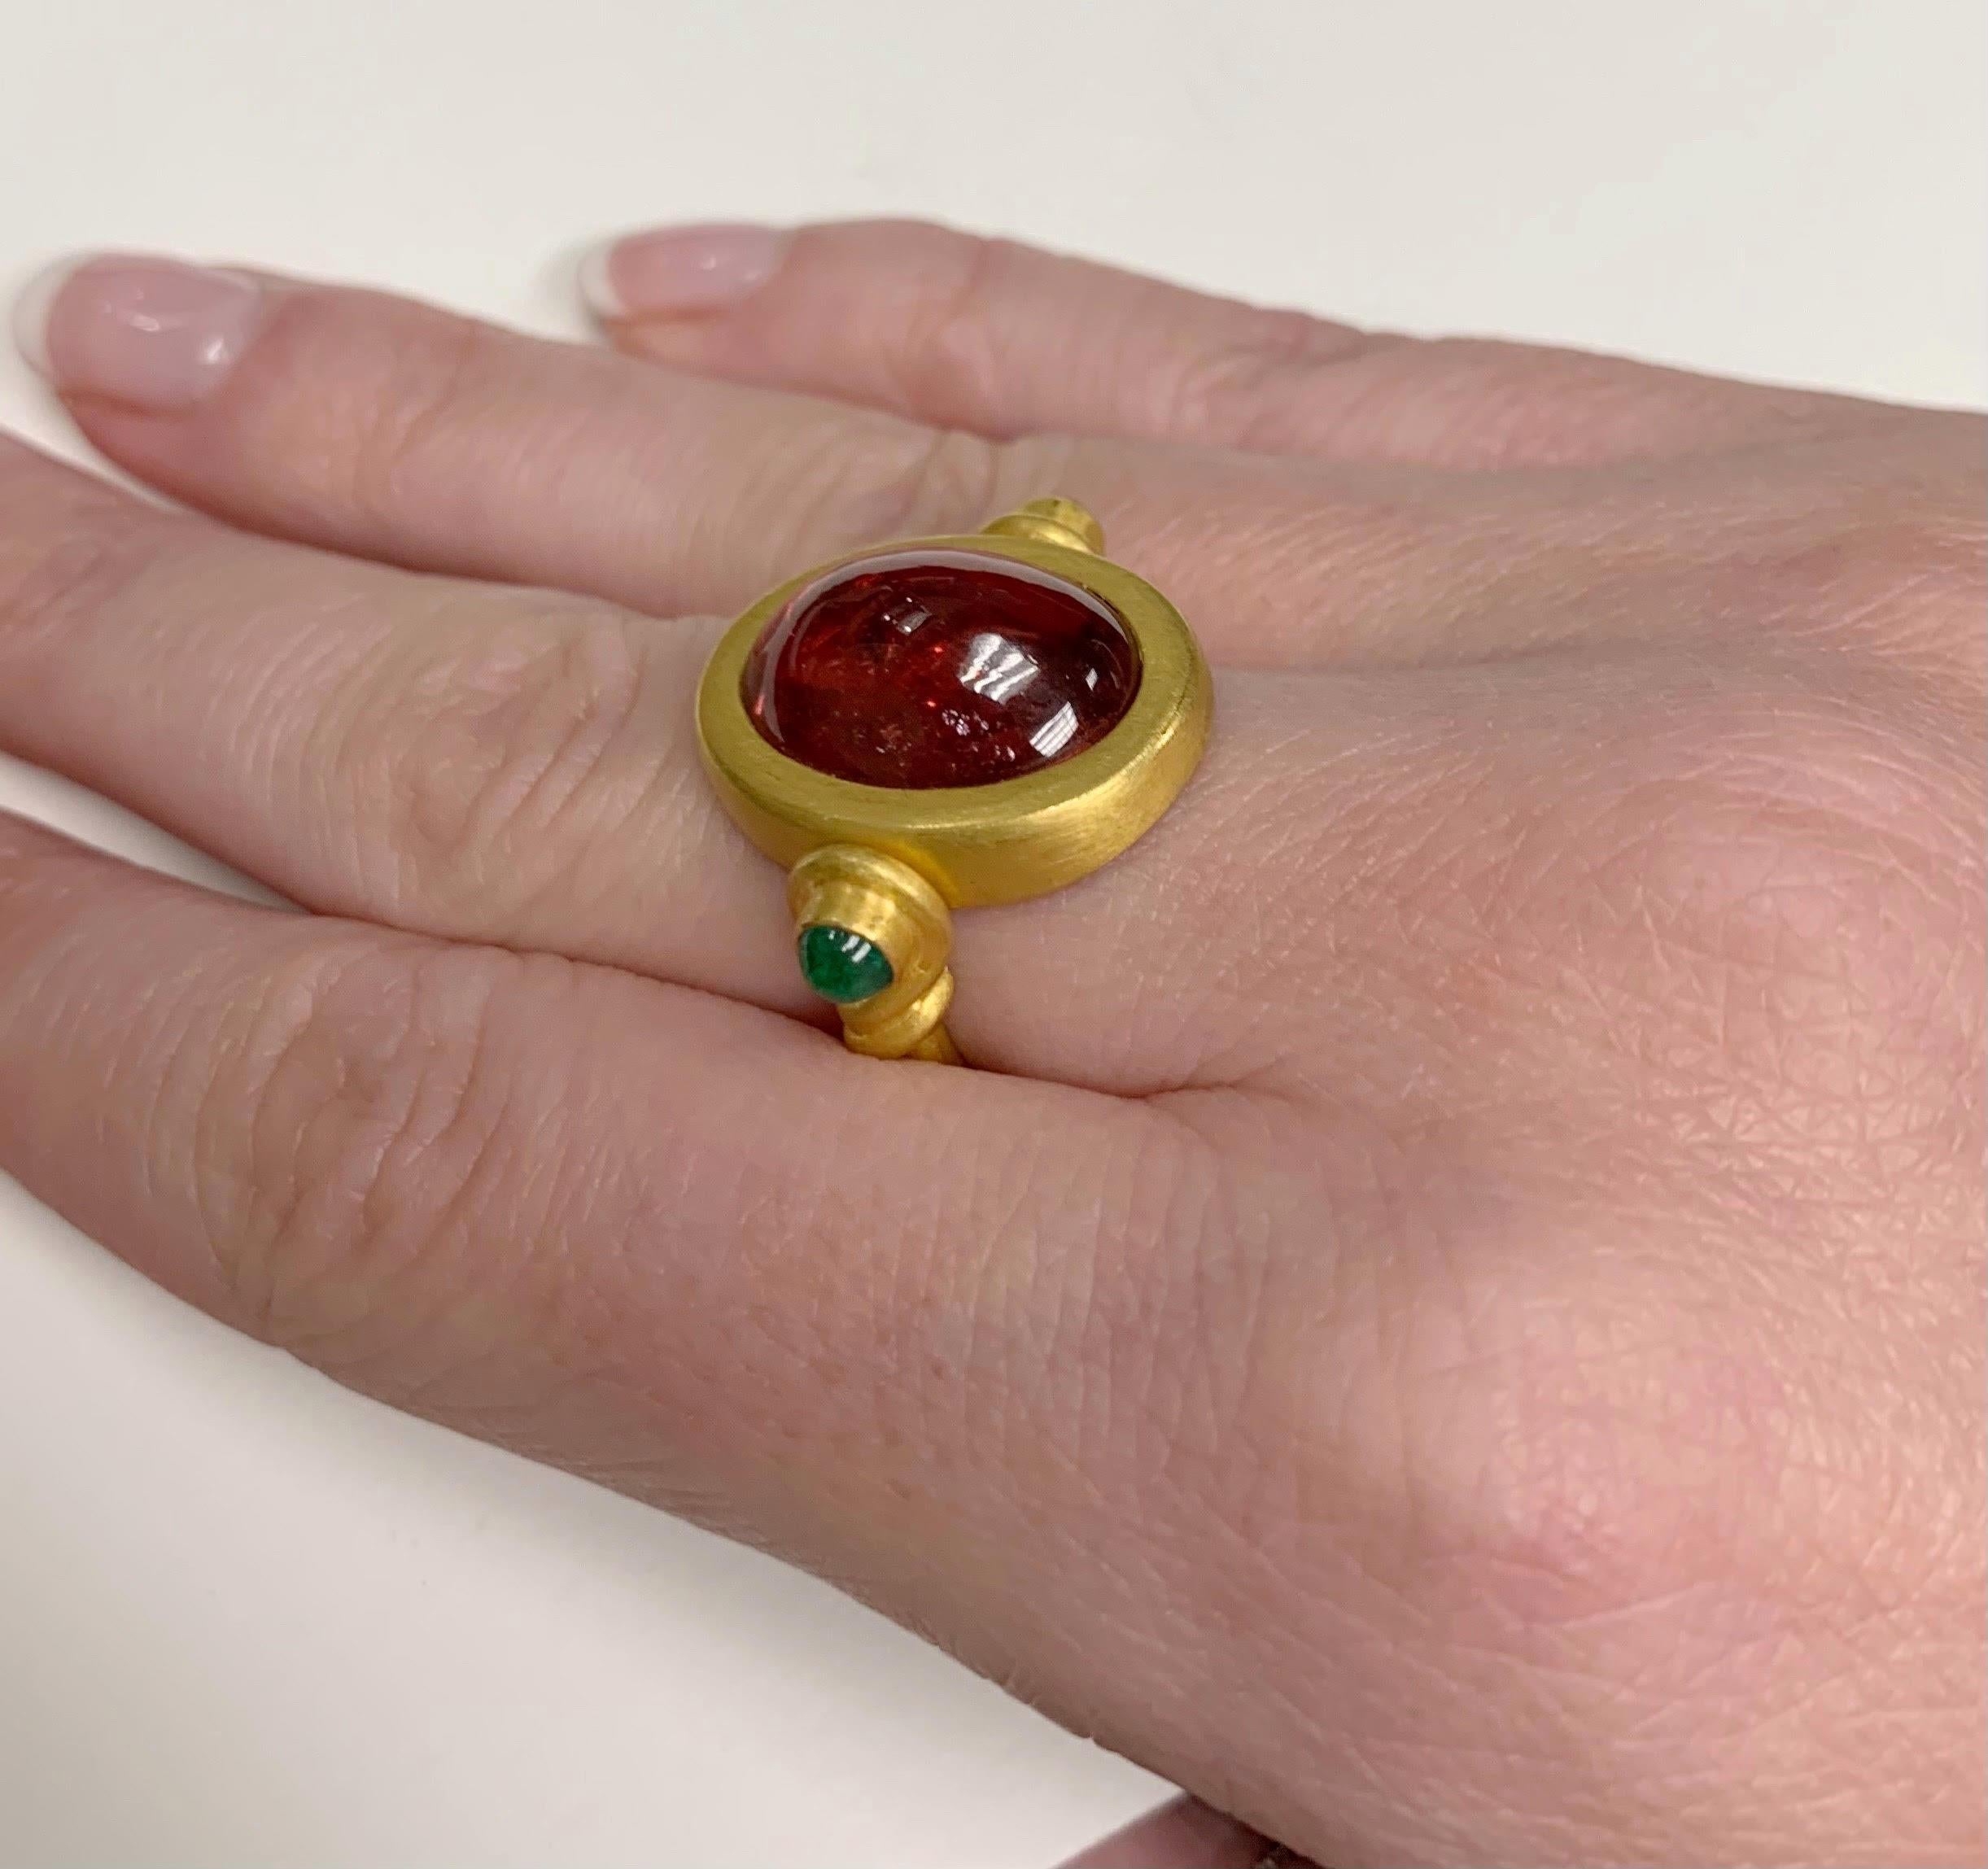 This playful cocktail ring is made of 22 karat yellow gold and features a large cabochon cut Rubelite Tourmaline. 2 Emerald cabochons are set on the top of the band. The center stone swivels independently from the ring as a design feature. The